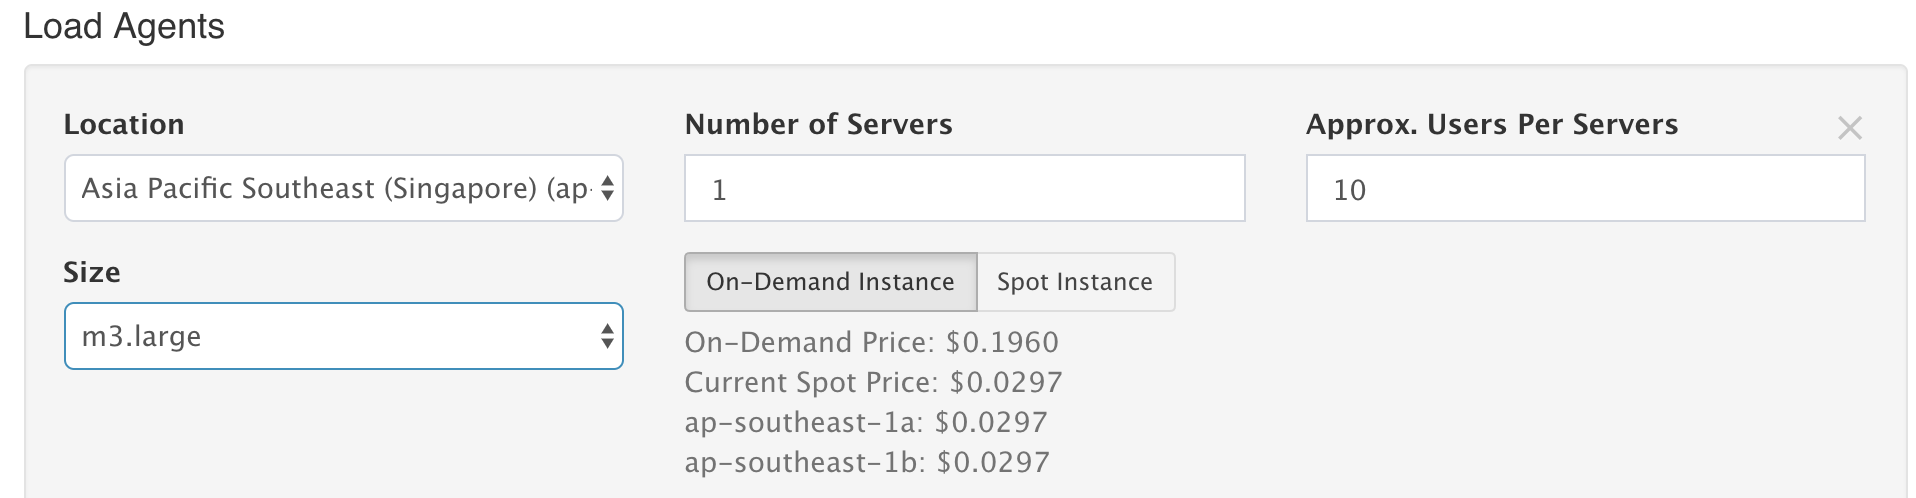 unavailable AWS instance types and available AWS instance types pricing